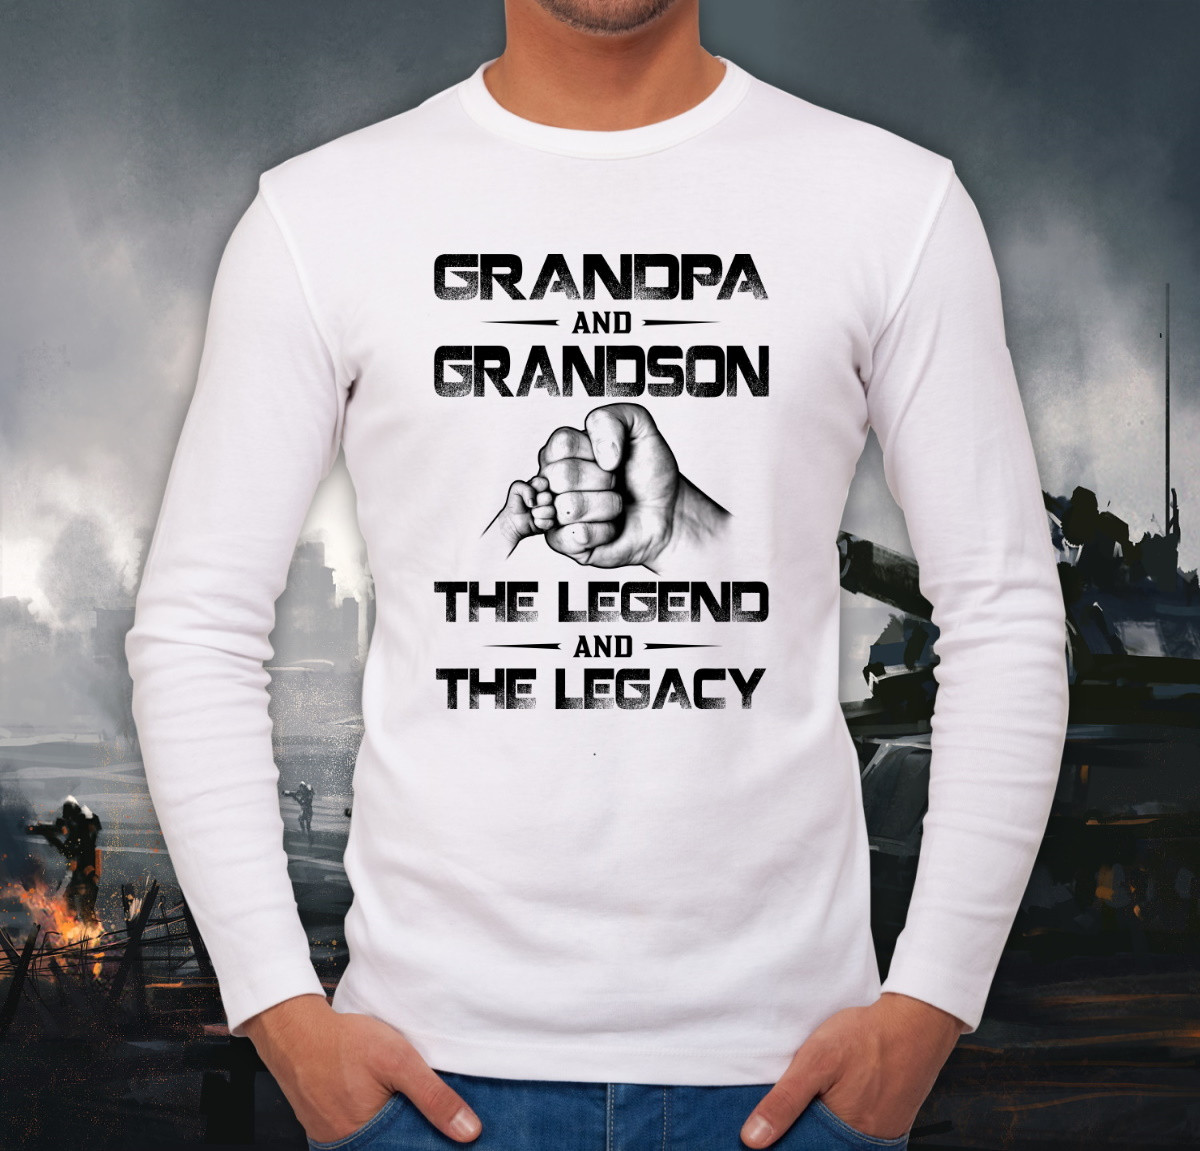 Grandpa And Grandson, The Legend And The Legacy, Father's Day Gift For Grandpa Long Sleeve Shirt